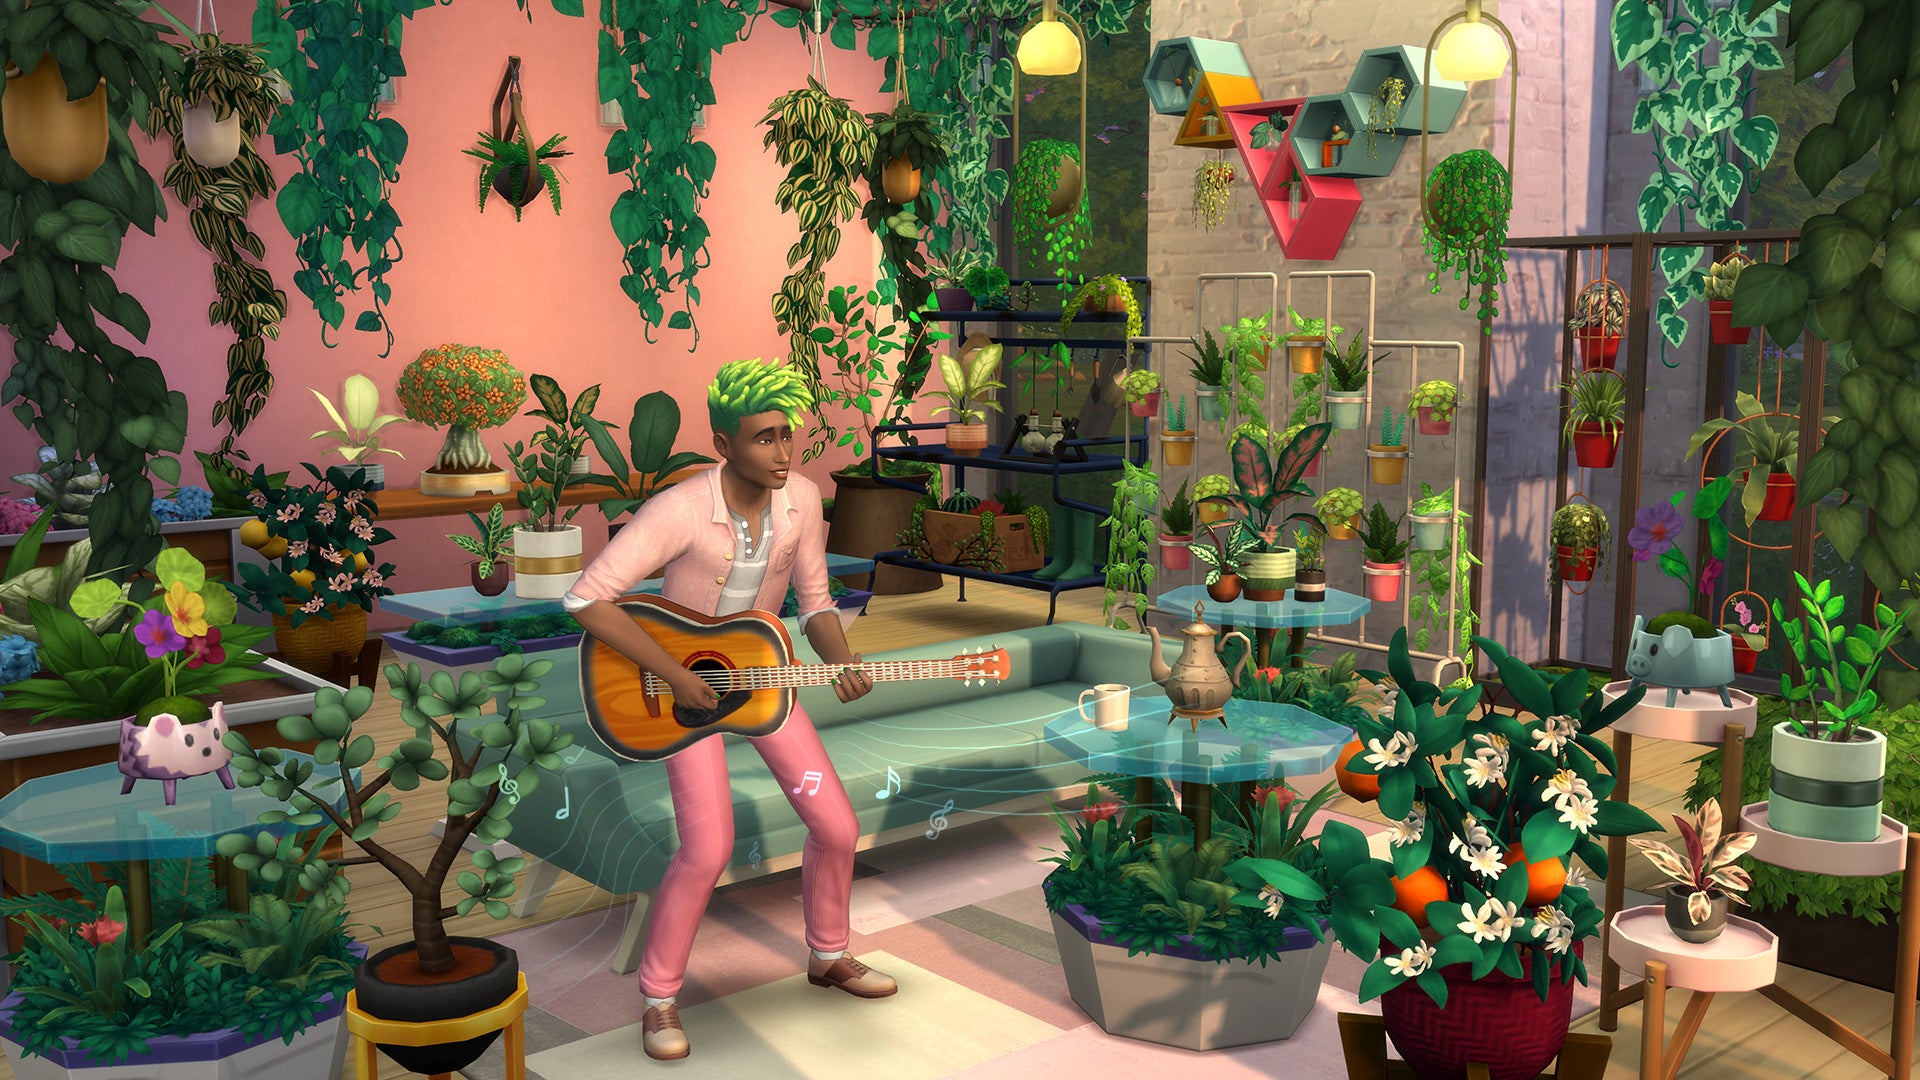 A screenshot of The Sims 4's Blooming Rooms Kit showing a green-haired sim in a living room filled with plants.